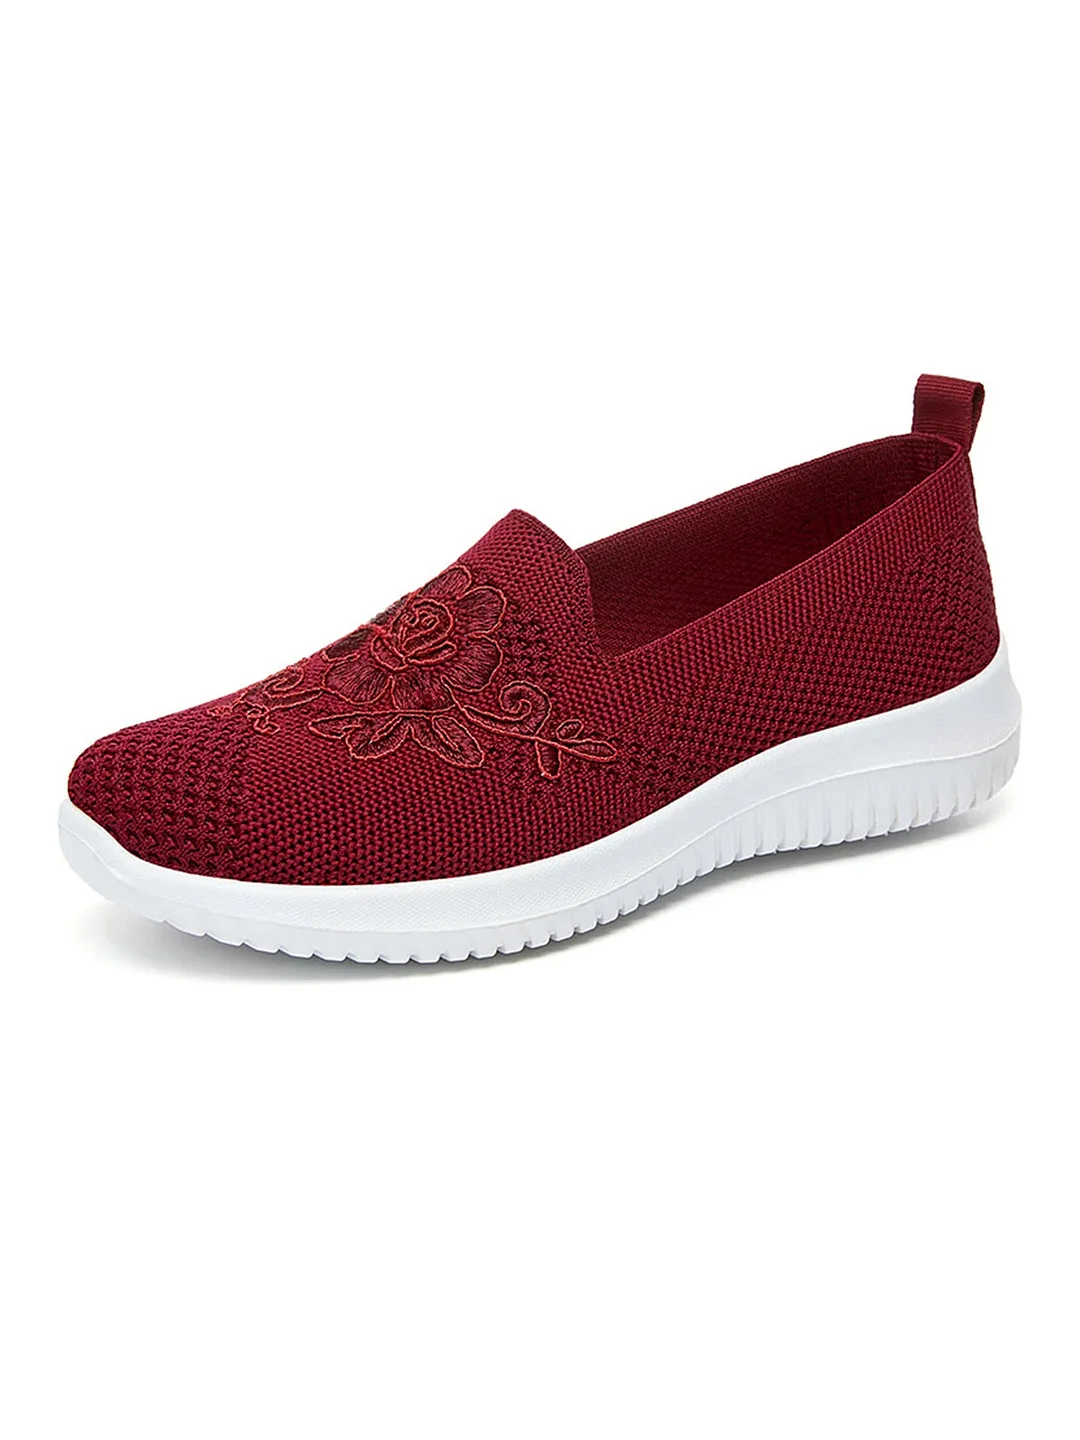 Women plus size clothing Sports Floral Breathable Slip On Flat Heel Fly Woven Shoes Embroidery-Nordswear